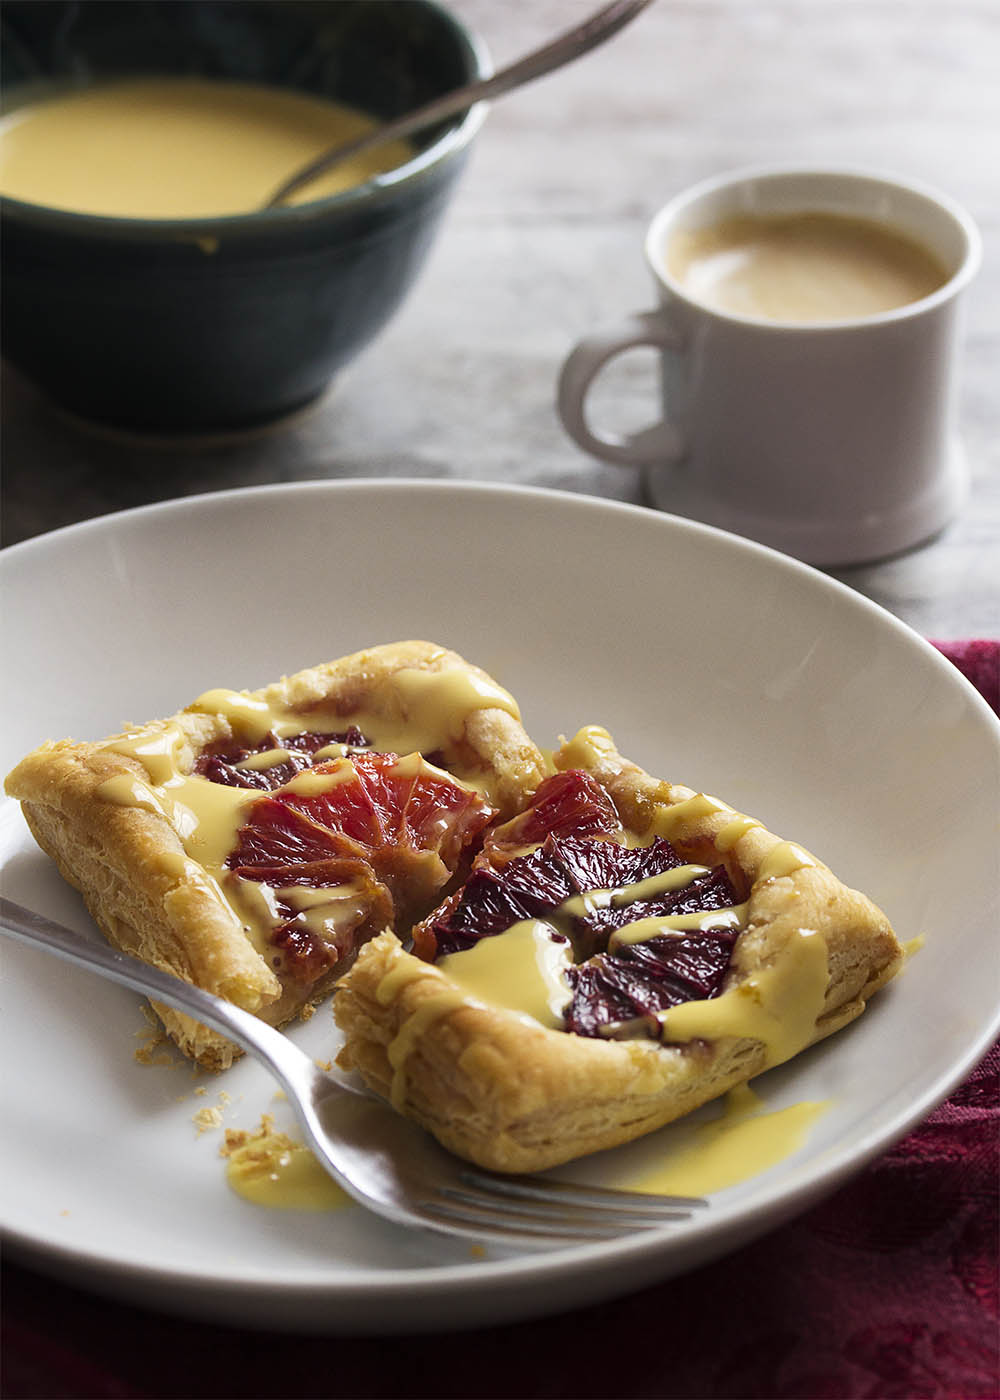 Looking for an easy but impressive dessert? Puff pastry and blood oranges make these orange galettes both beautiful and a snap to bake. | justalittlebitofbacon.com